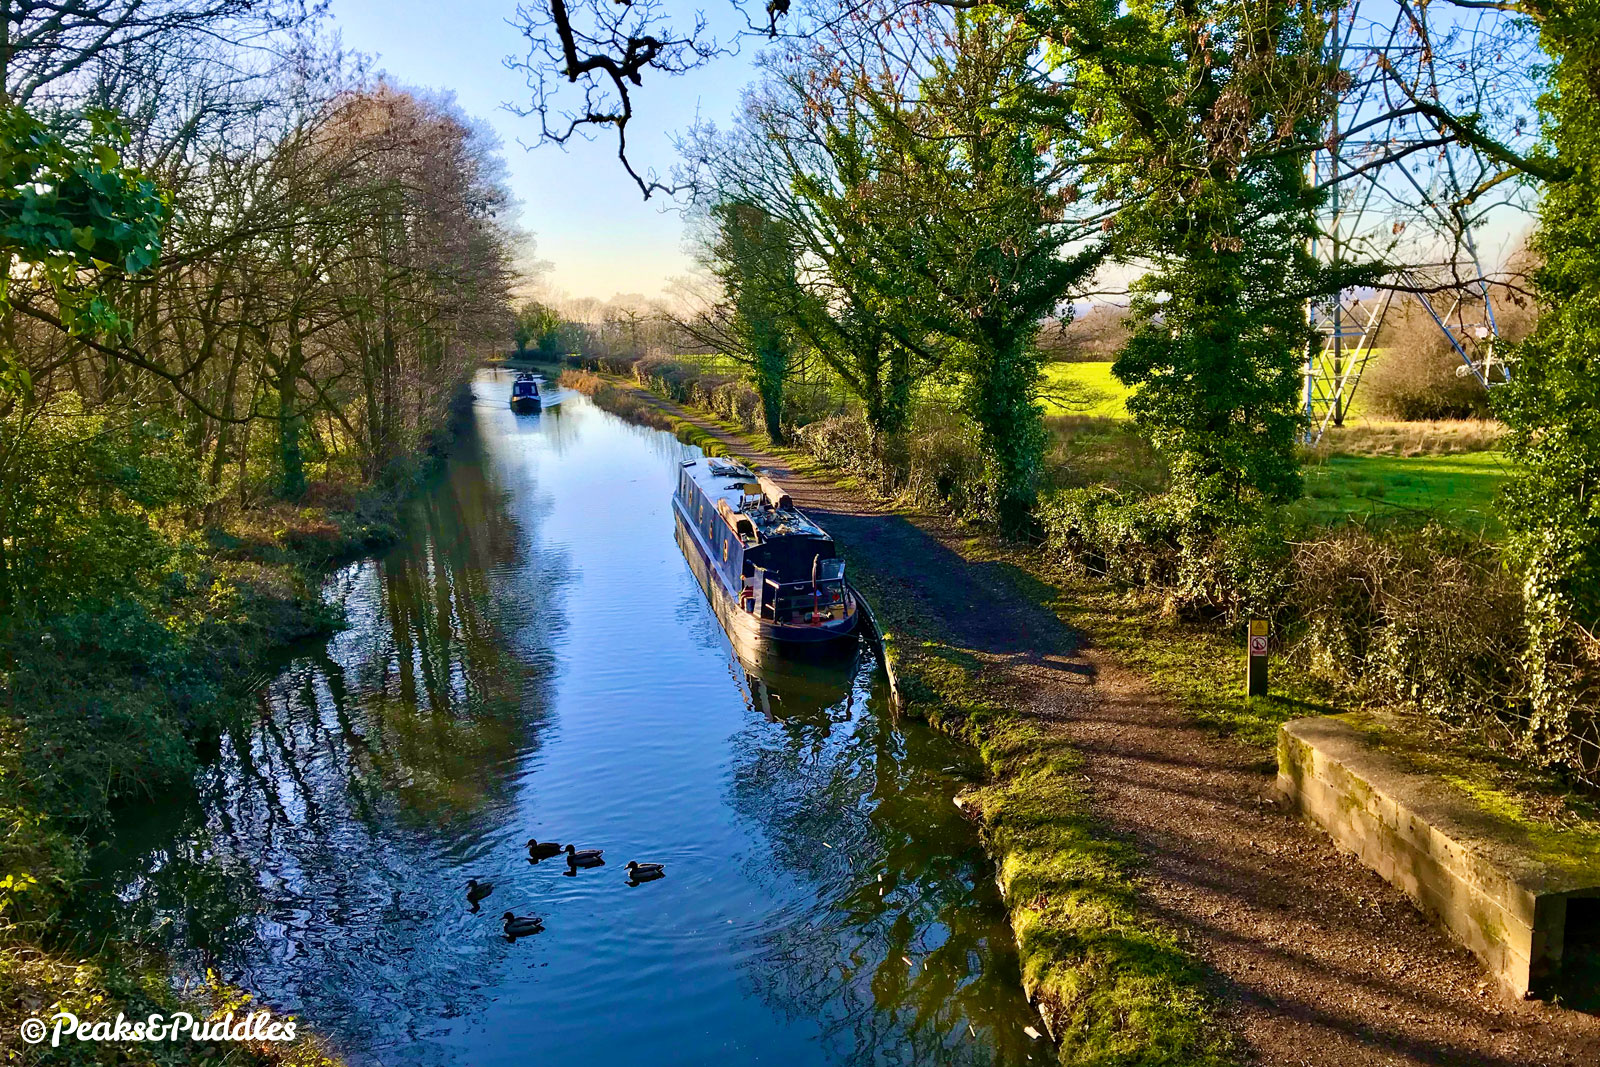 The Macclesfield Canal from Springbank Lane.